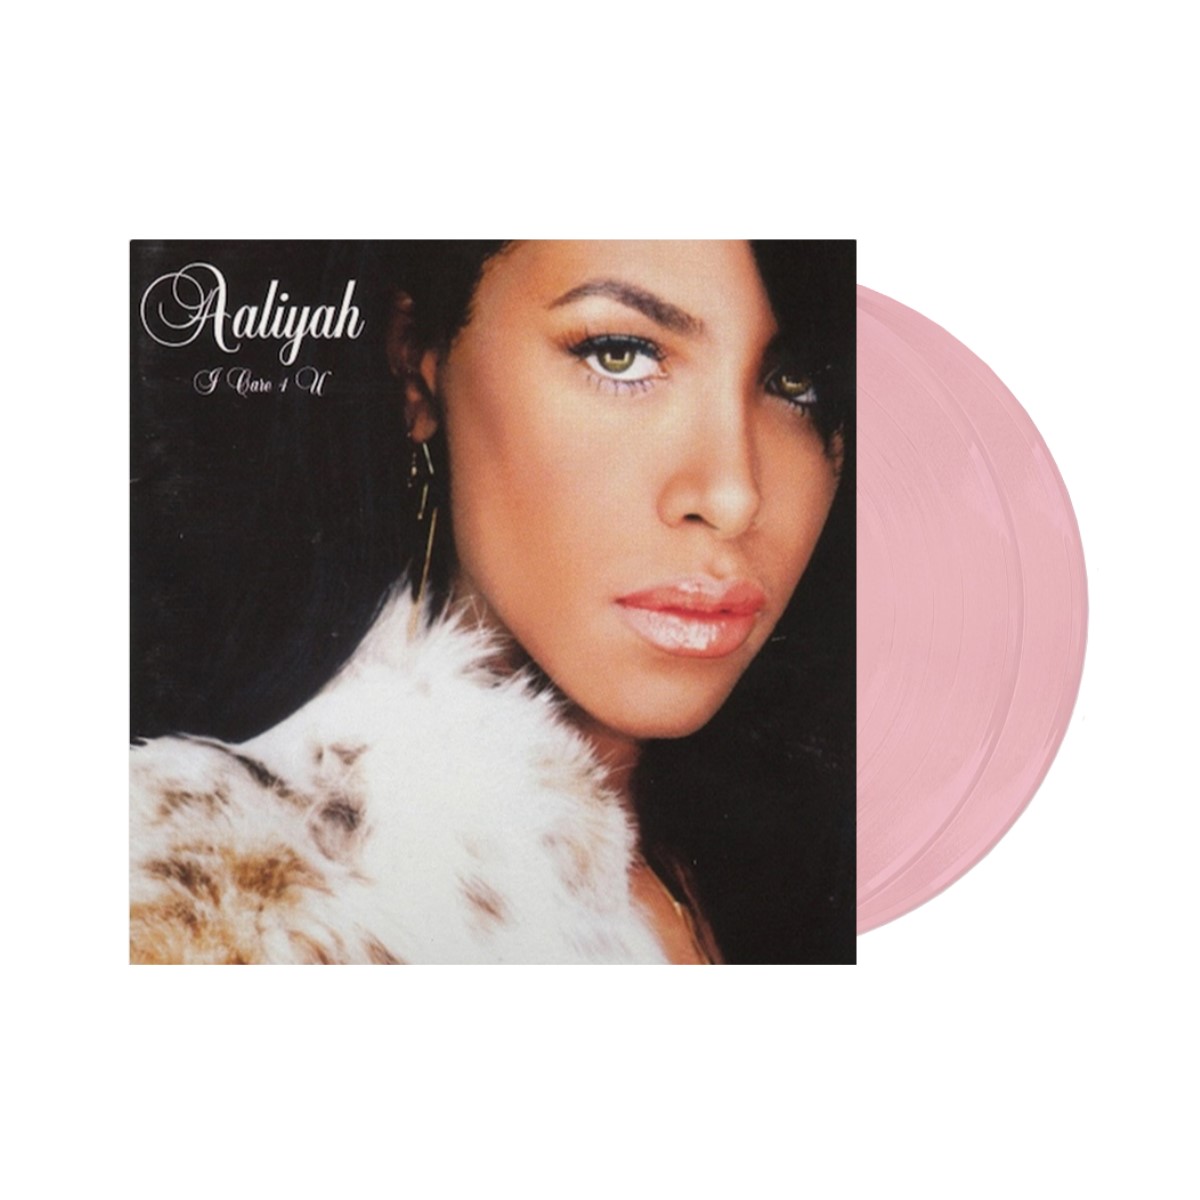 Girl　Color　Aaliyah　I　Limited　LP　Care　Exclusive　Vinyl　Baby　Pink　2x